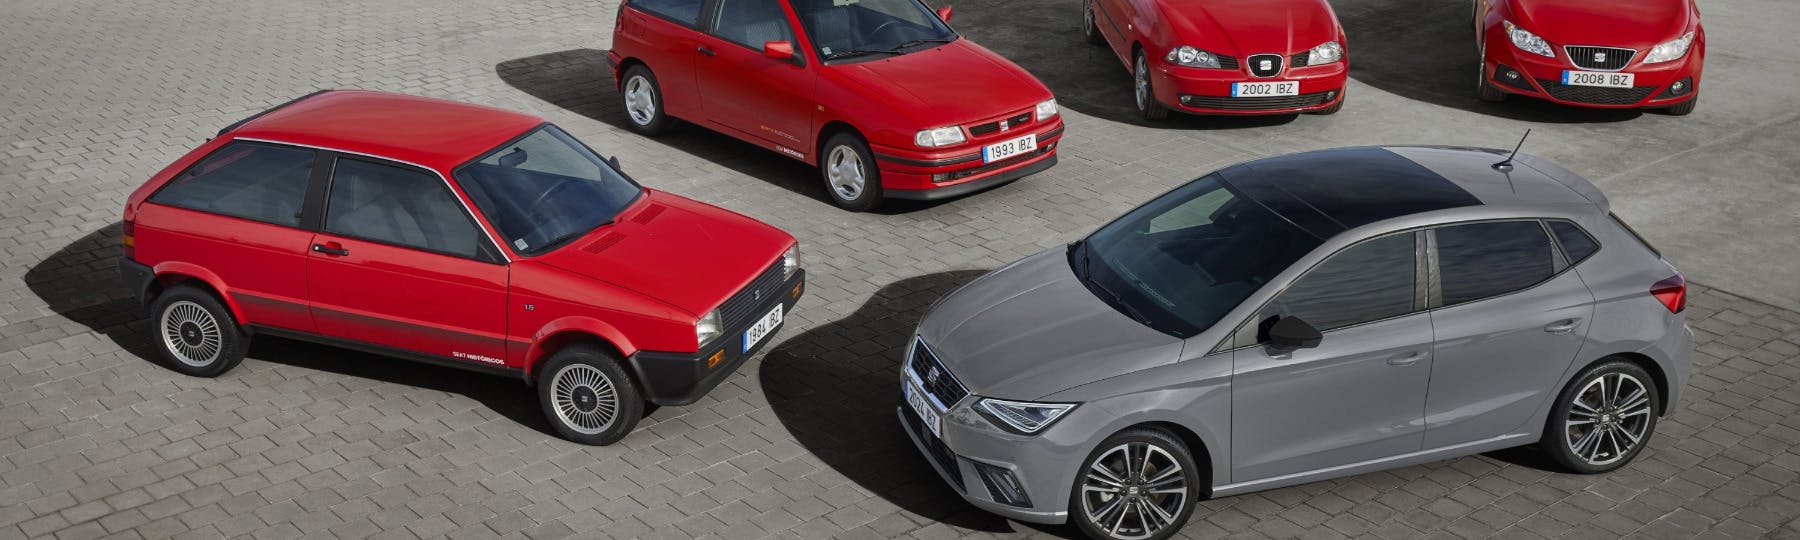 SEAT Ibiza Event Offer